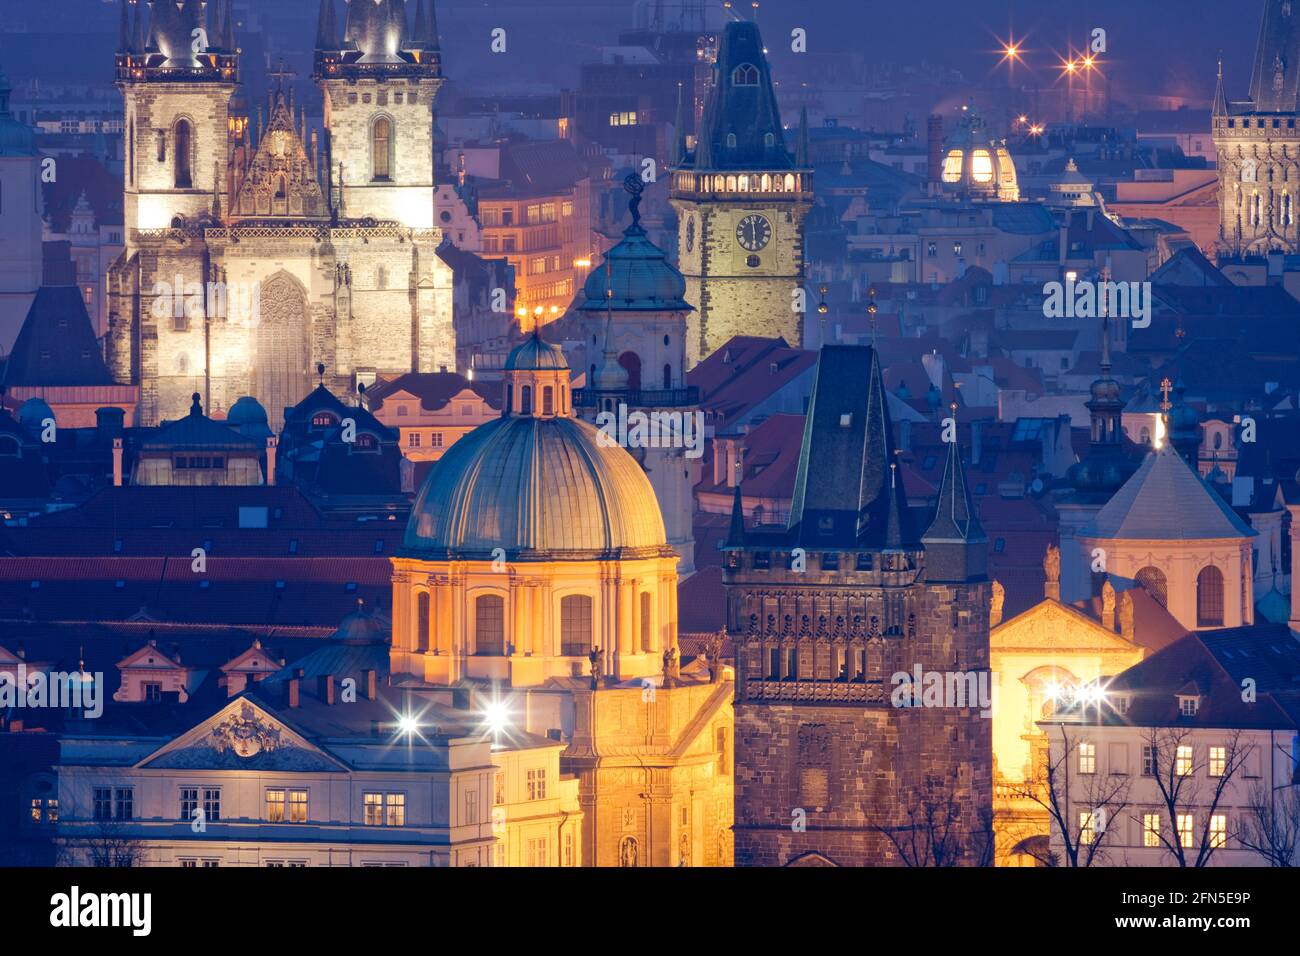 Prague, Czechia - Spires and churches of Old town at dusk. Stock Photo